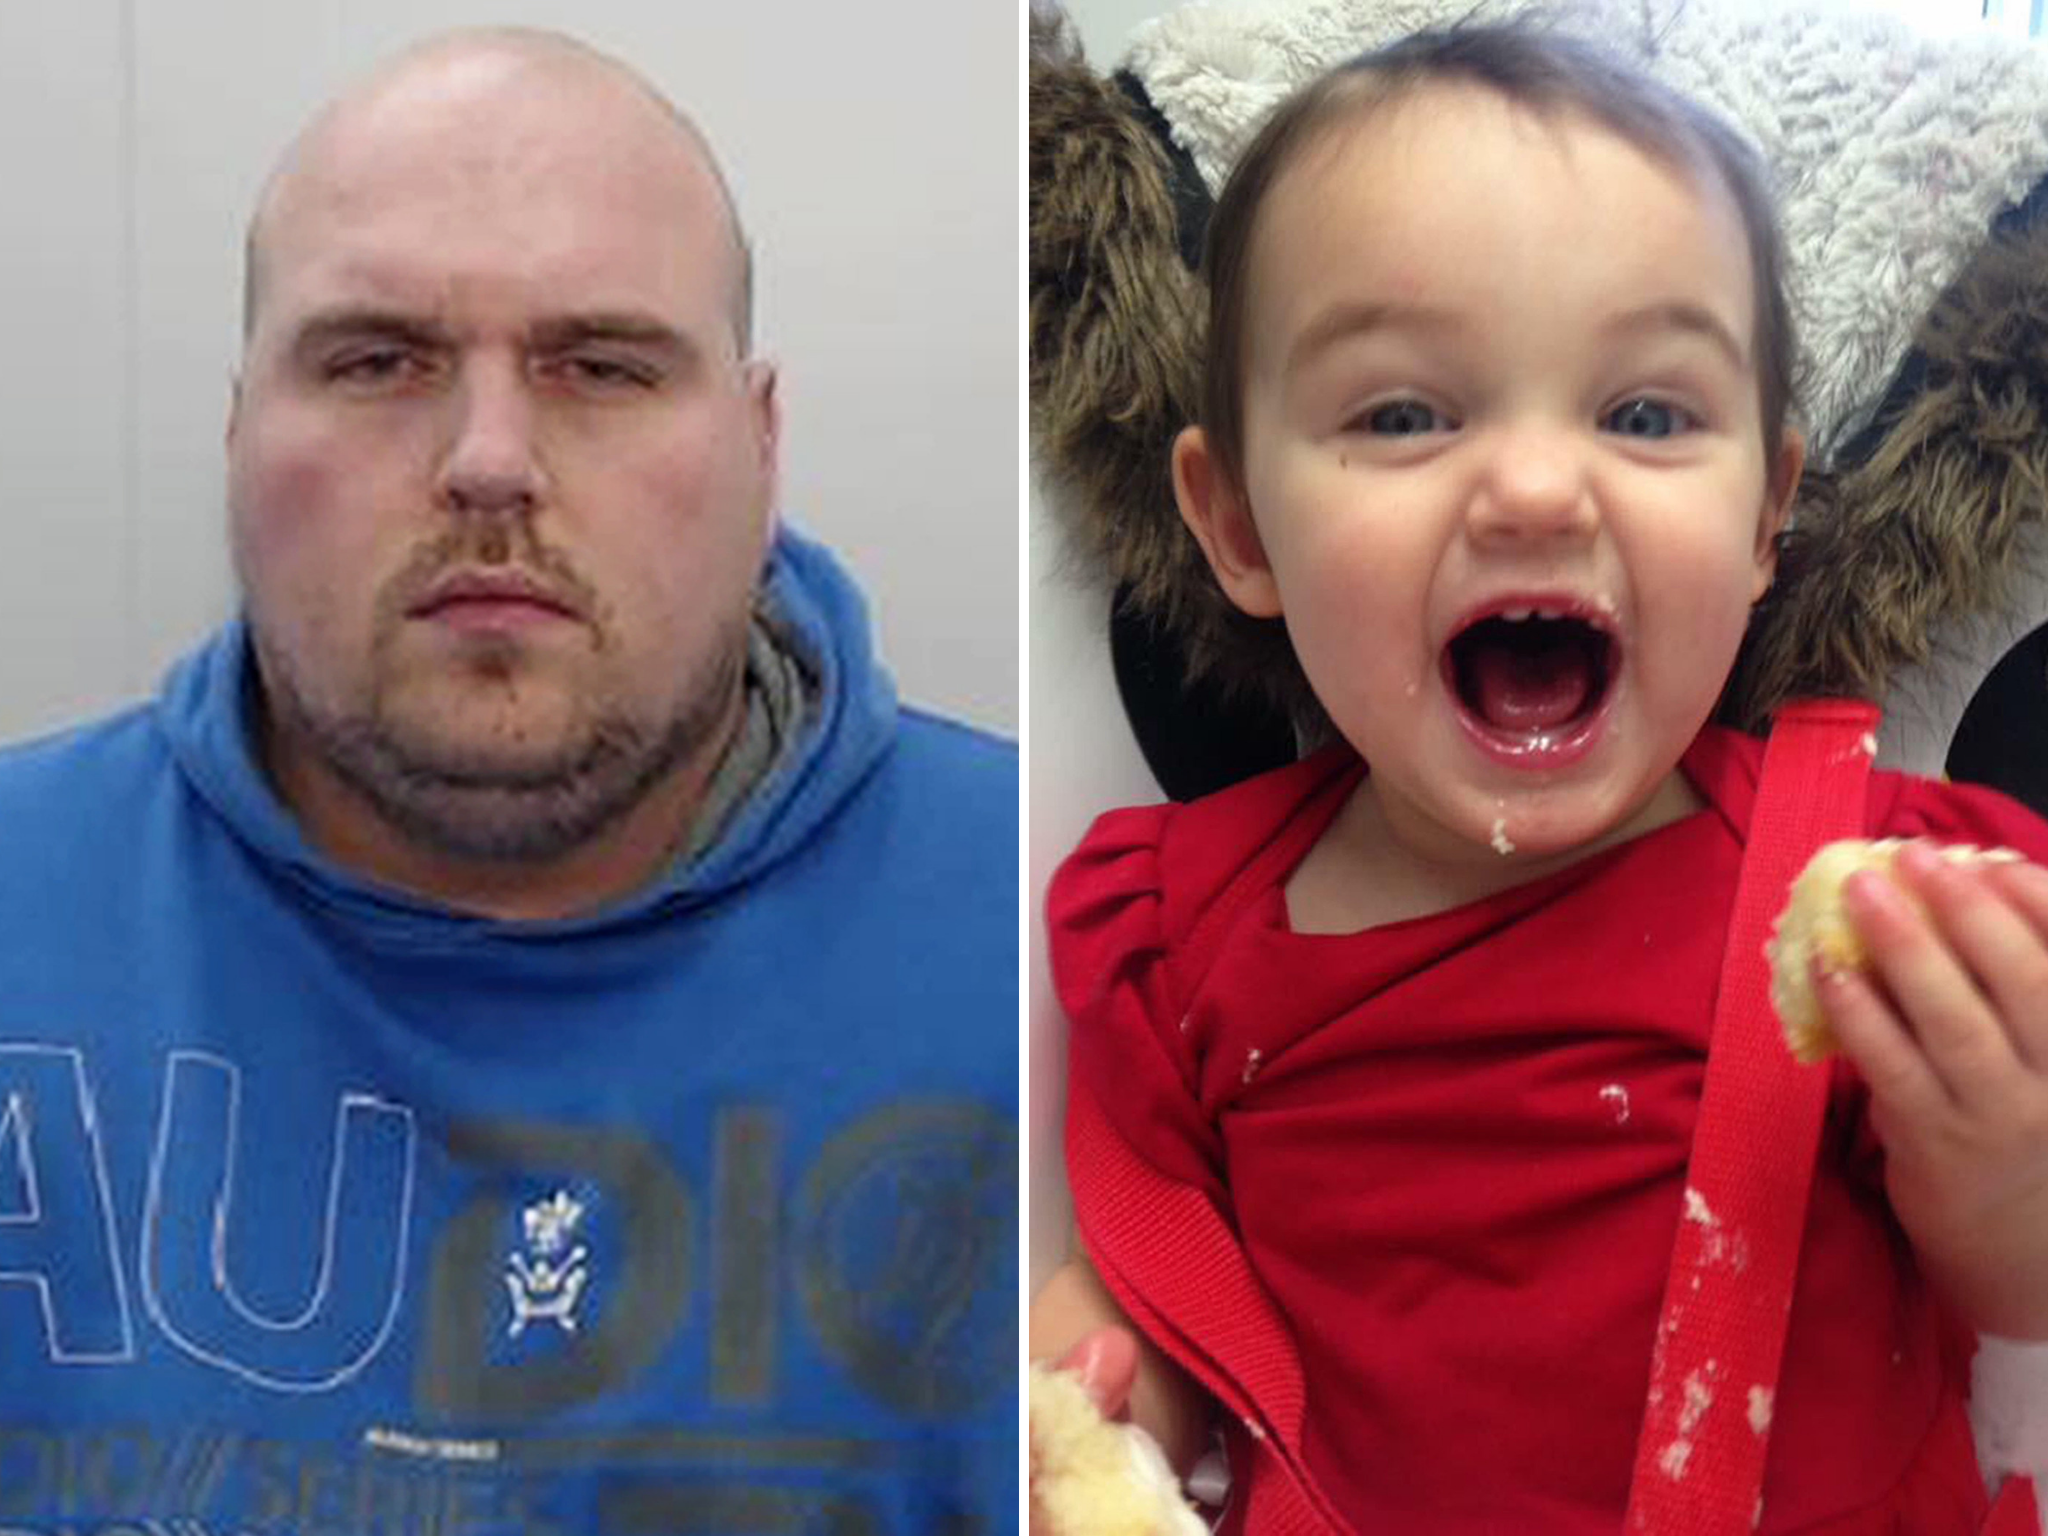 Michael Wild, 30, of Wythenshawe, Manchester, has been jailed for life and will serve at least 20 years for the murder of 22-month-old Ella-Rose Clover on 21 January 2018.